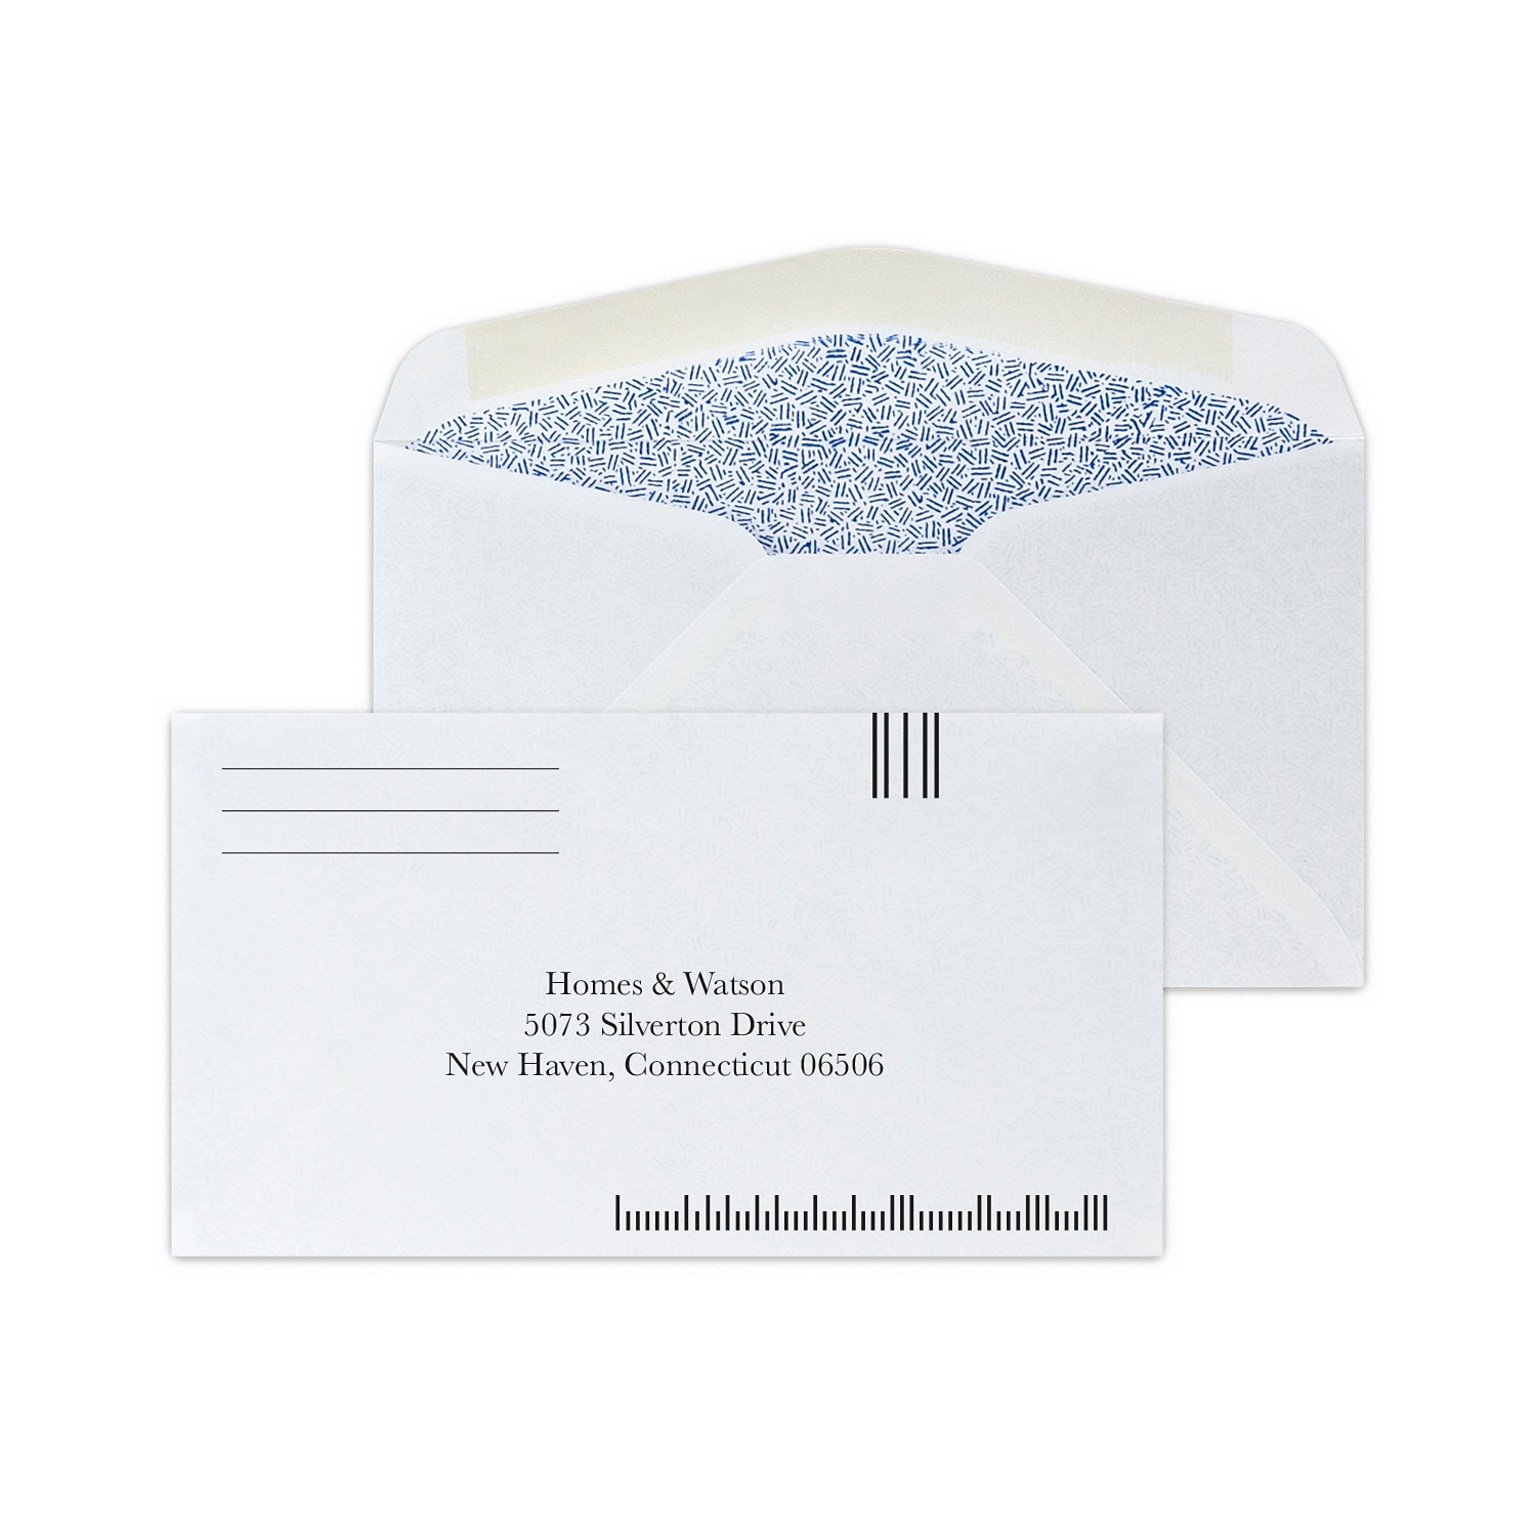 Custom #6-3/4 Barcode Diagonal Seam Standard Envelopes with Security Tint, 3 5/8x6 1/2, 24# White Wove, 1 Std Ink, 250/Pack